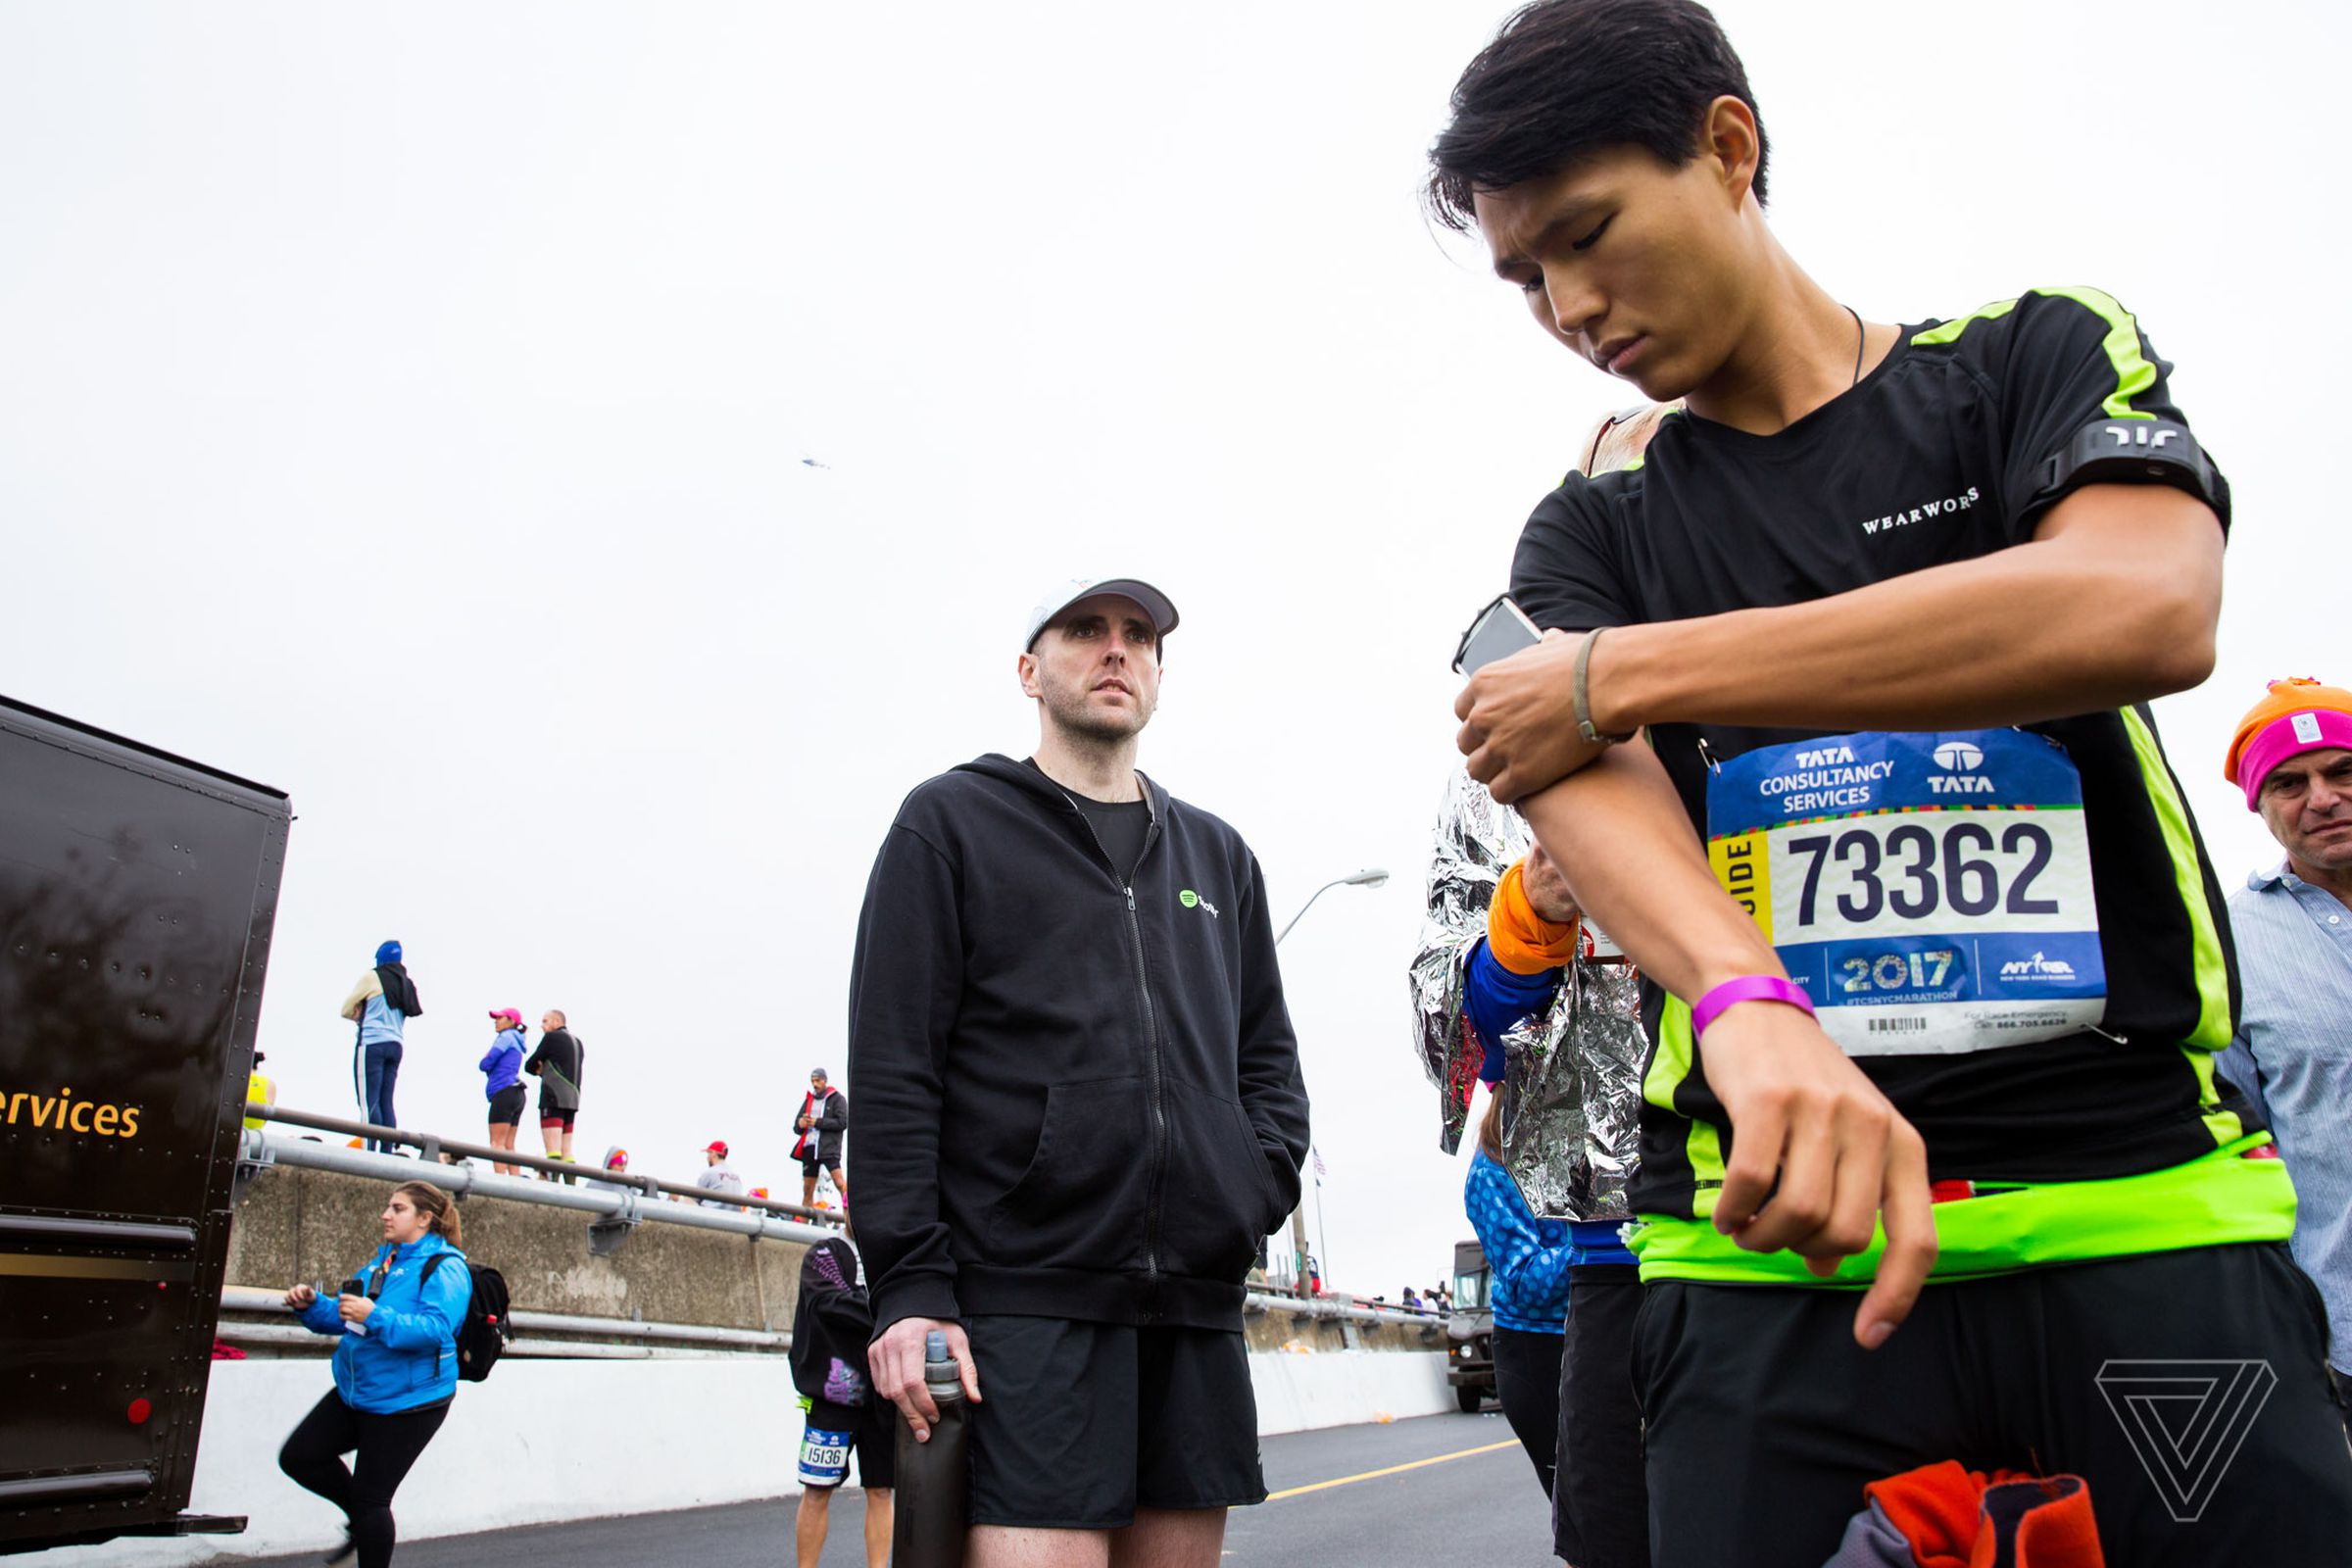 WearWorks co-founder Kevin Yoo adjusting the equipment prior to the race